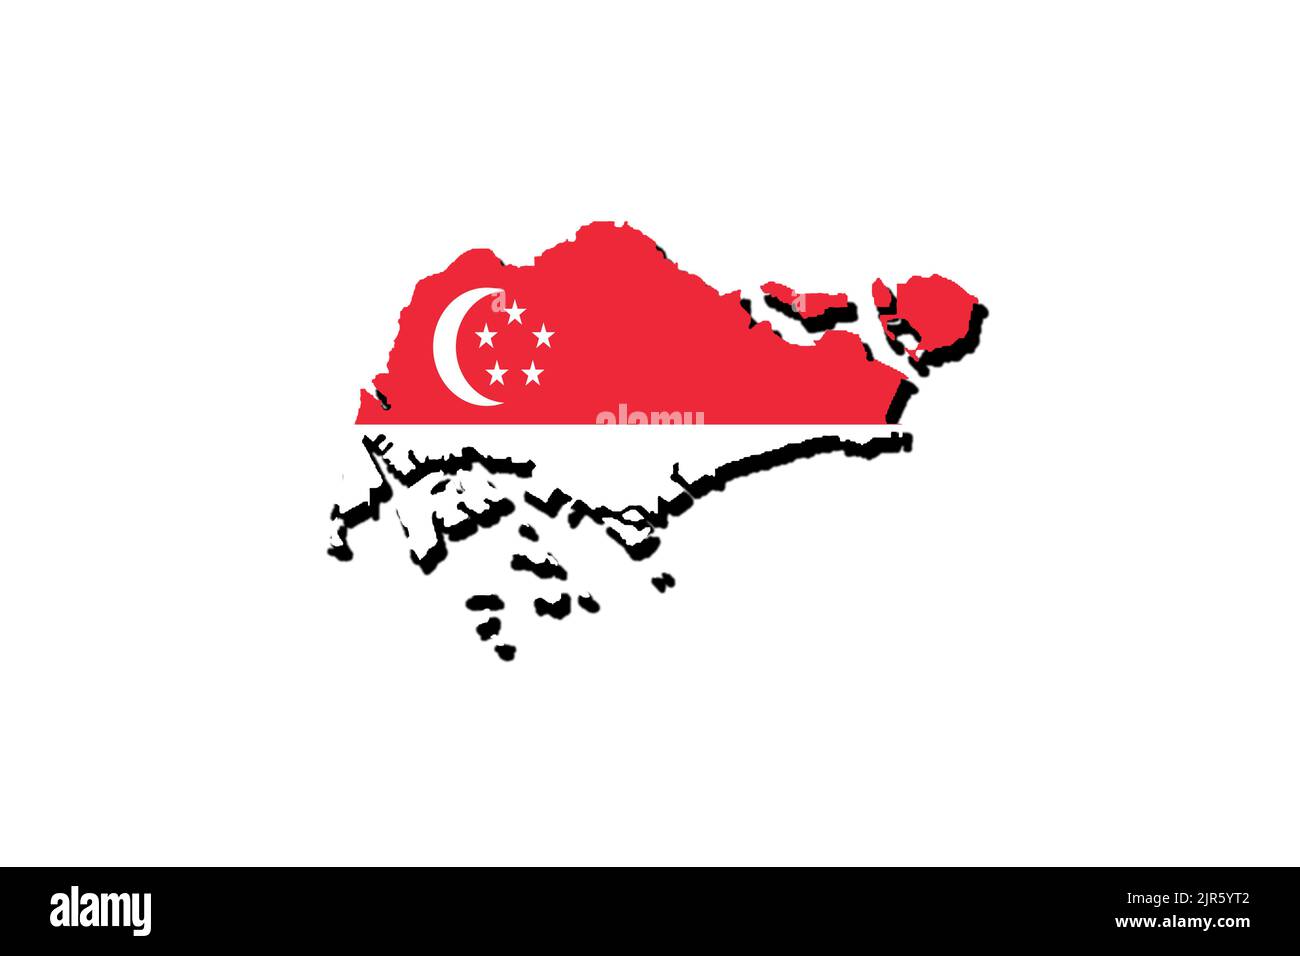 Silhouette of the map of Singapore with its flag Stock Photo